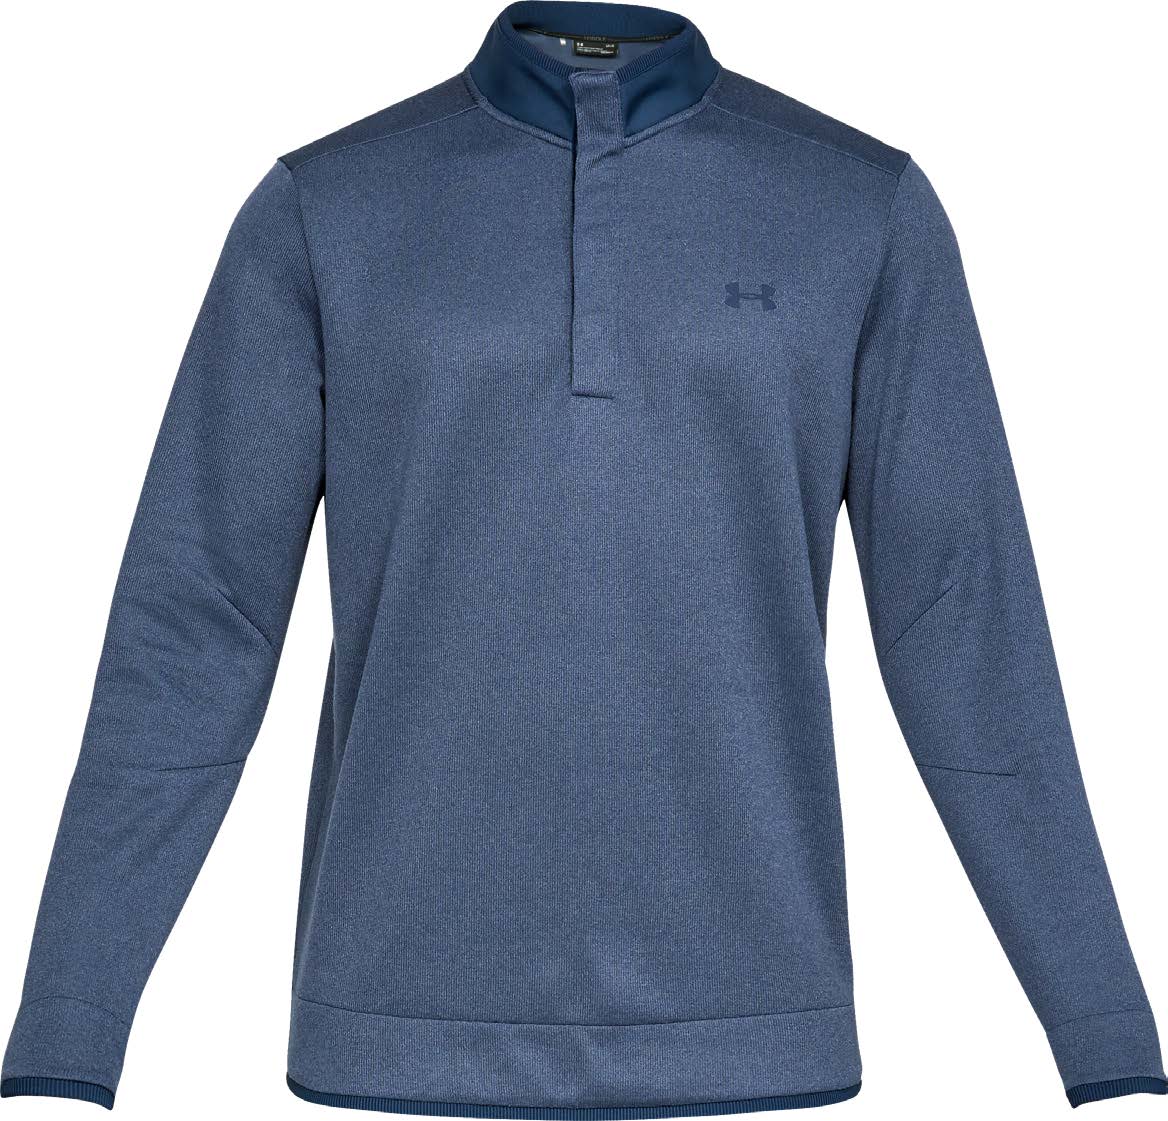 Layer up with Under Armour